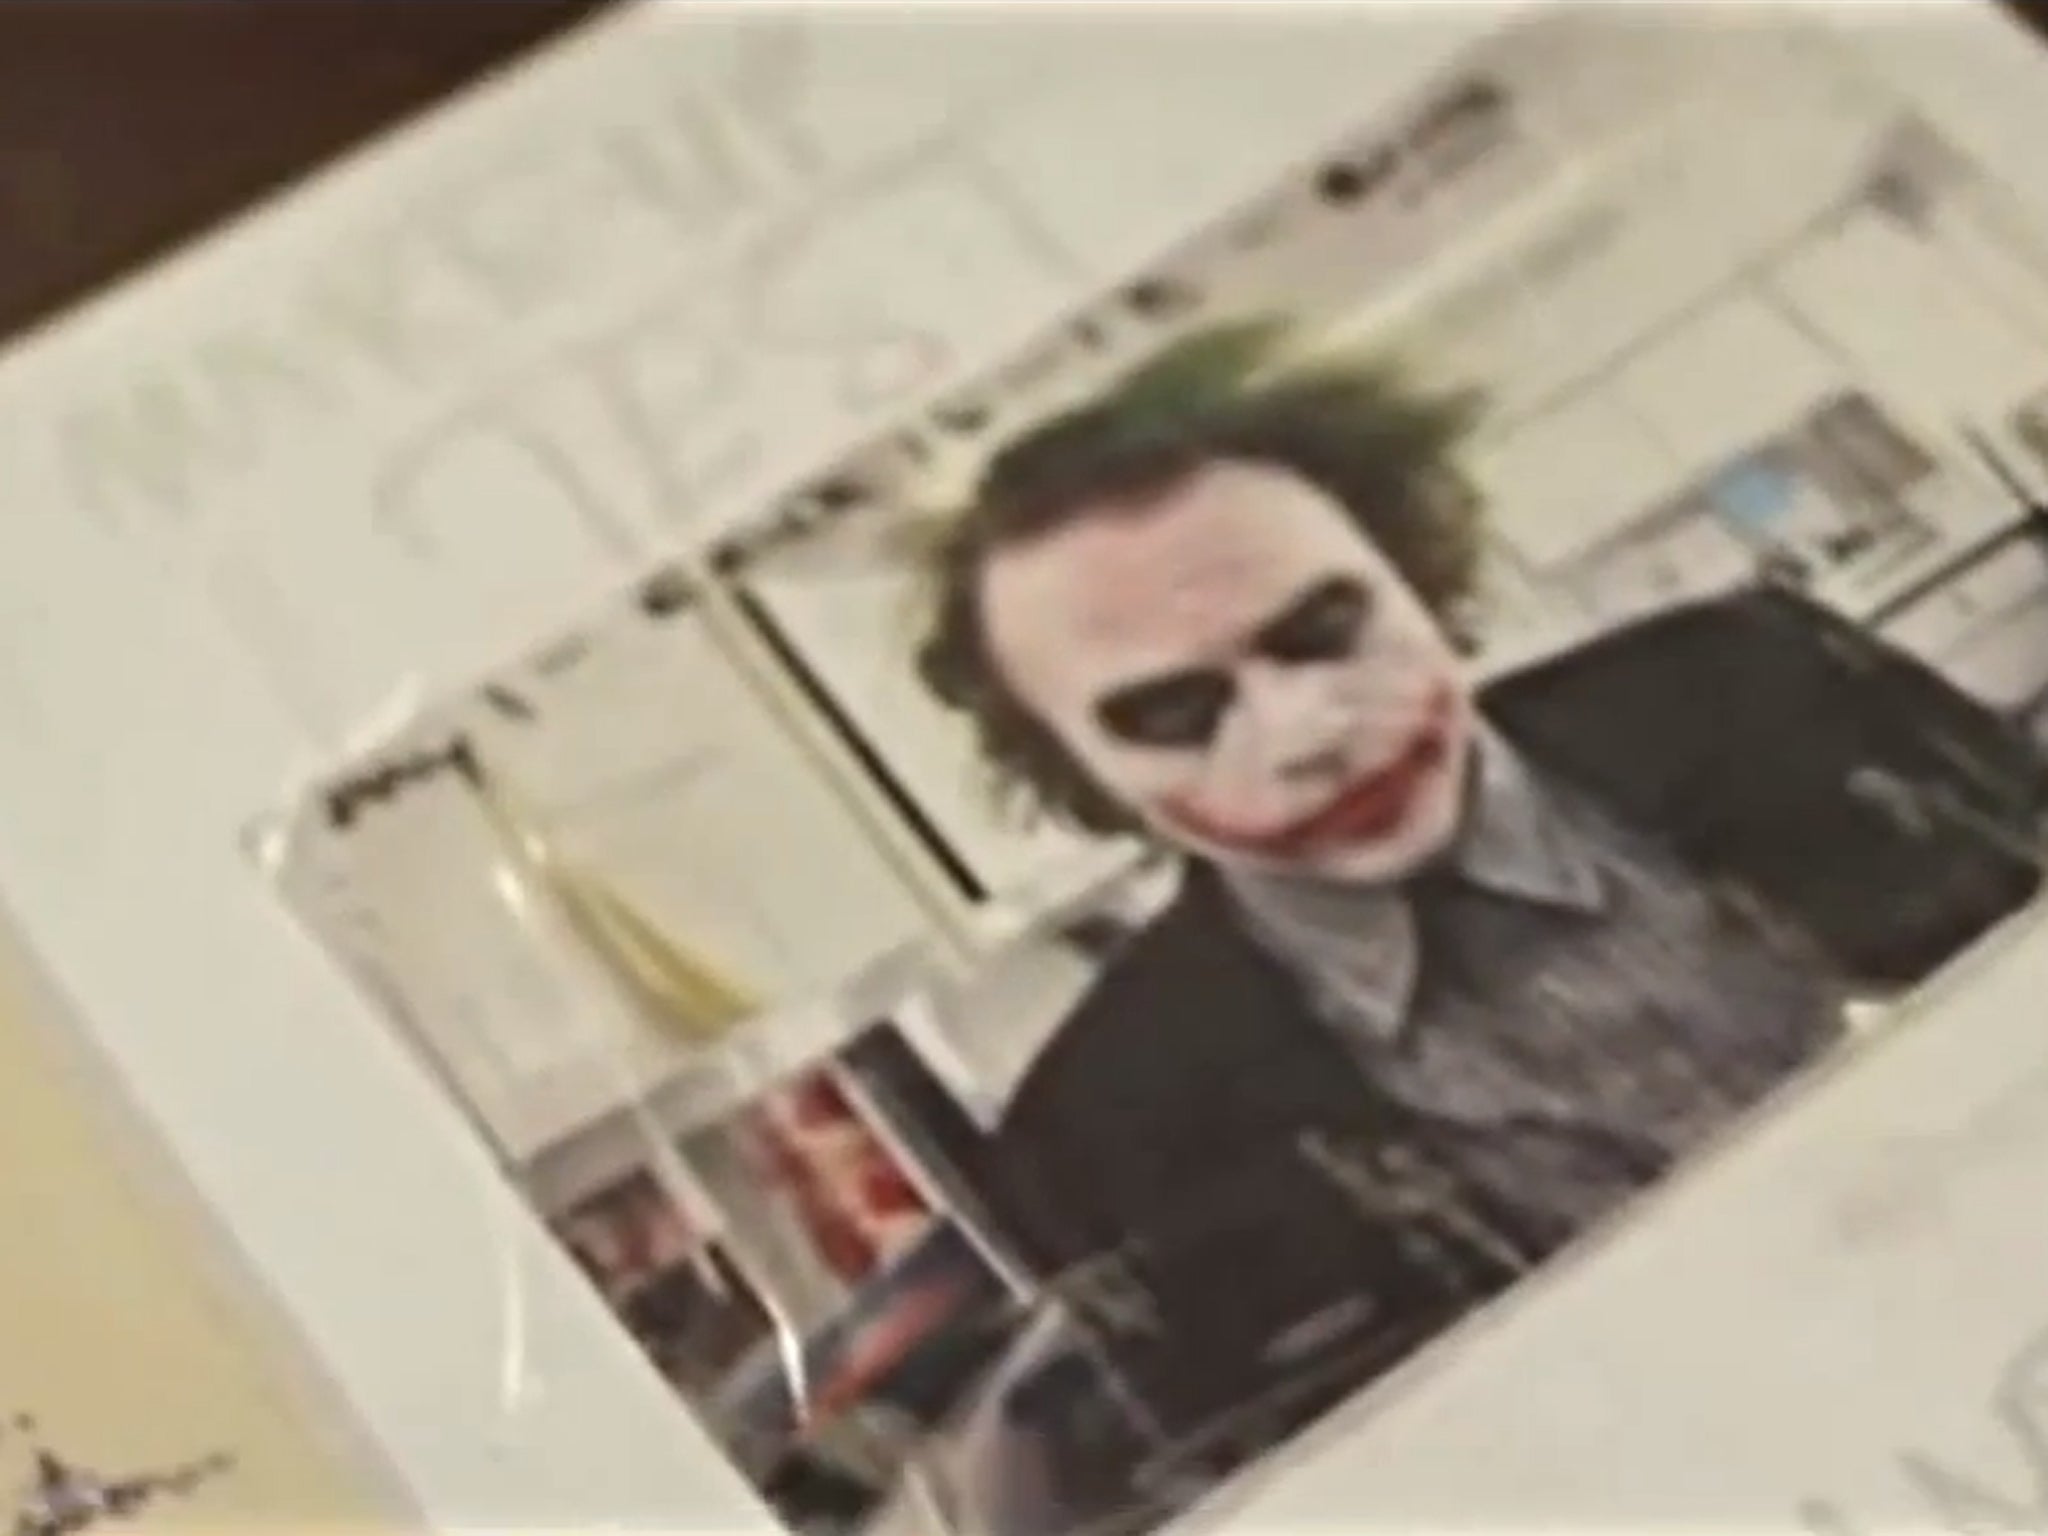 A still from 'Too Young to Die' showing Heath Ledger in Joker make-up